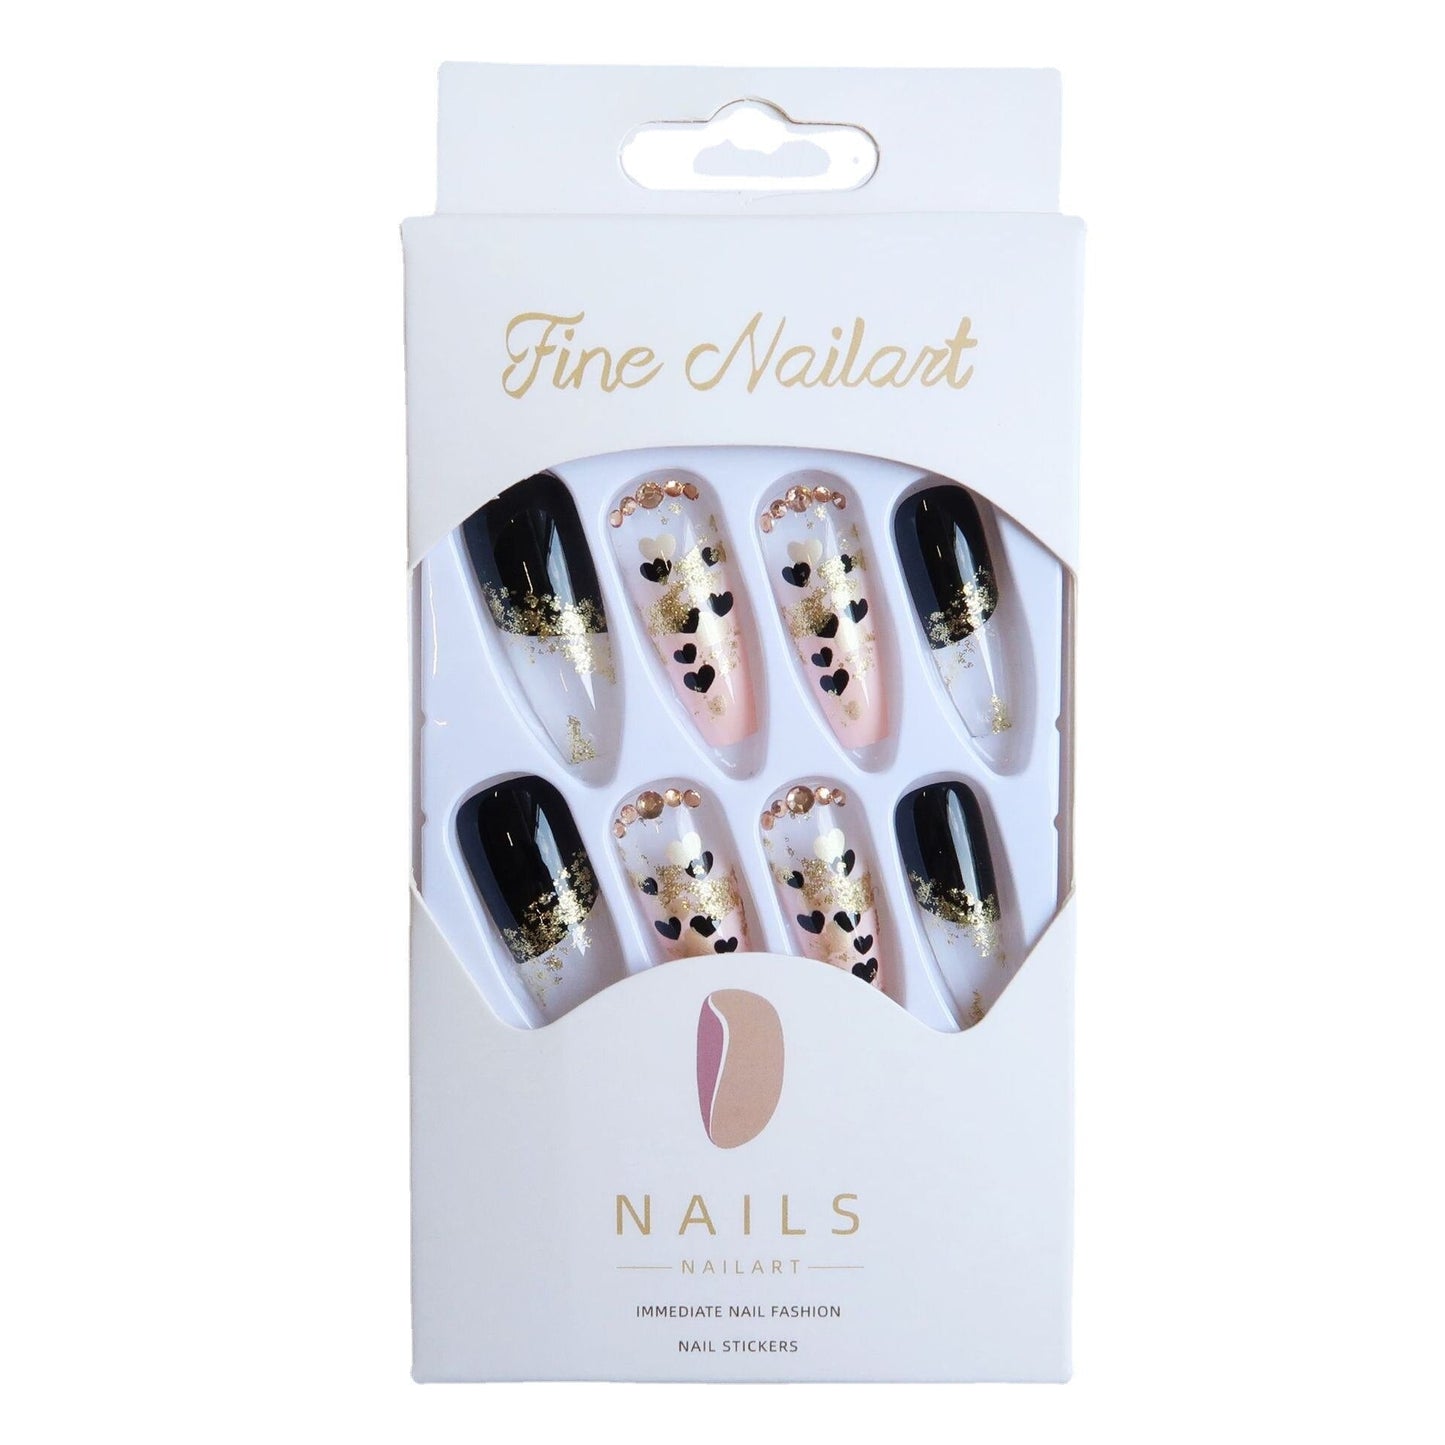 3D fake nails accessories long french coffin tips black gold heart glitters with diamond designs faux ongles press on false nail